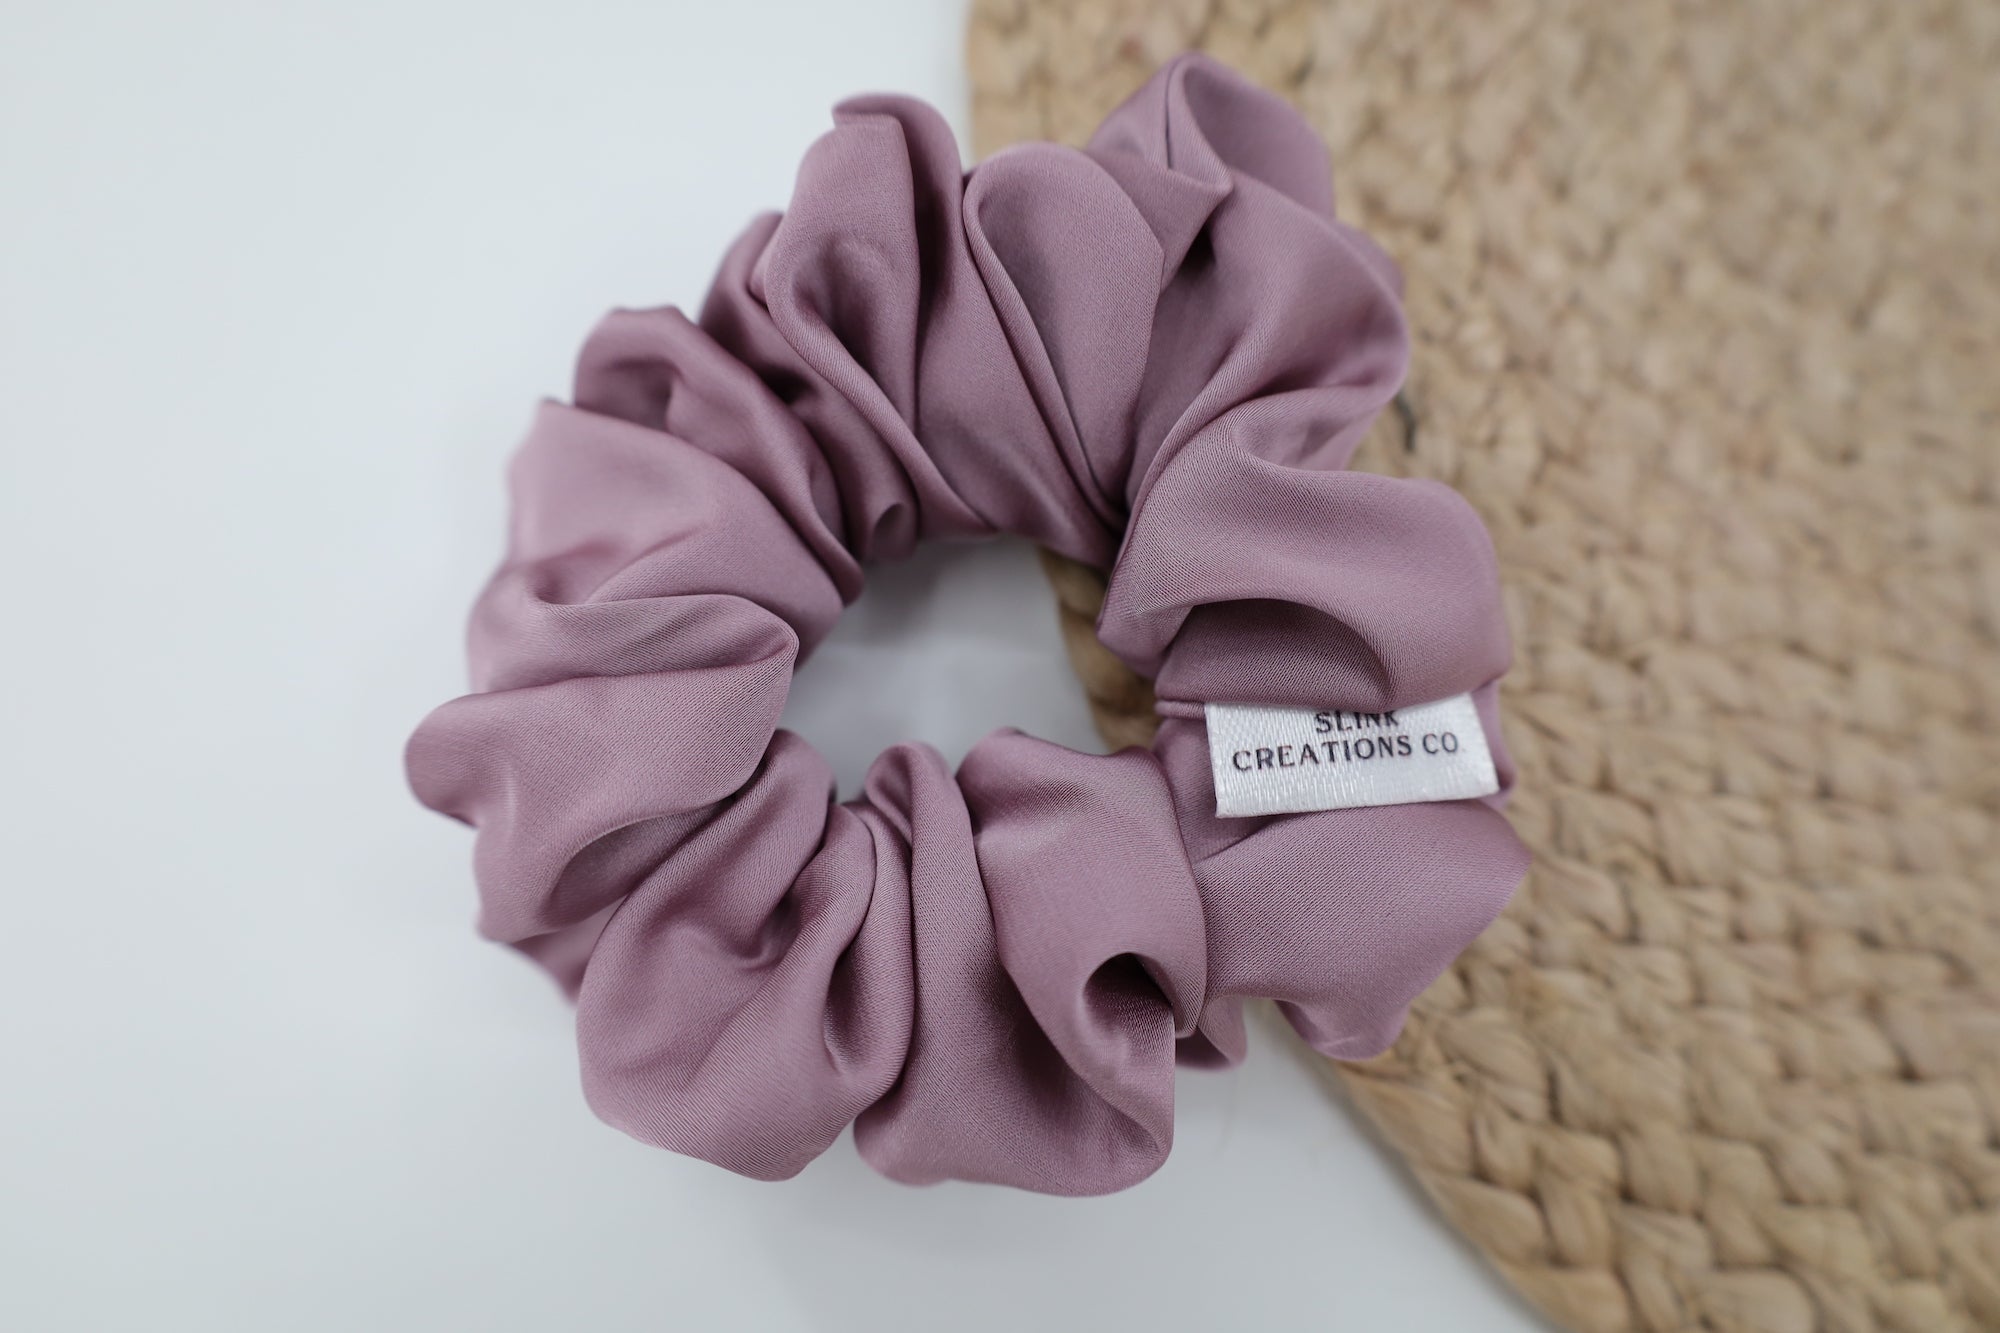  Silk Scrunchies for Hair 100% Mulberry Silk Hair Ties 3  Pack(Pink, Peacock Blue, Apricot) : Beauty & Personal Care